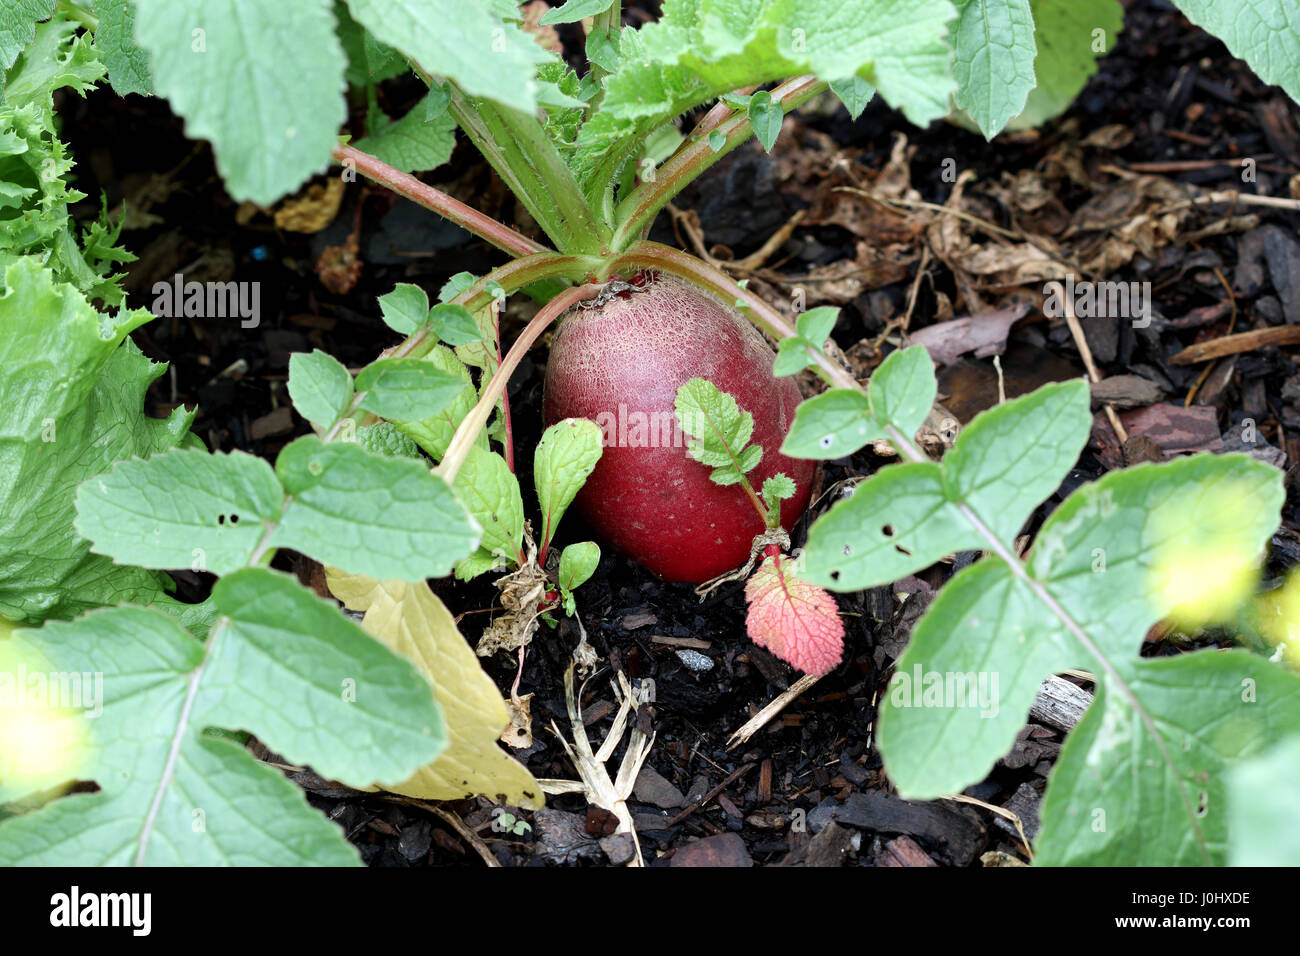 Raphanus raphanistrum or known as Radish growing in the ground Stock Photo